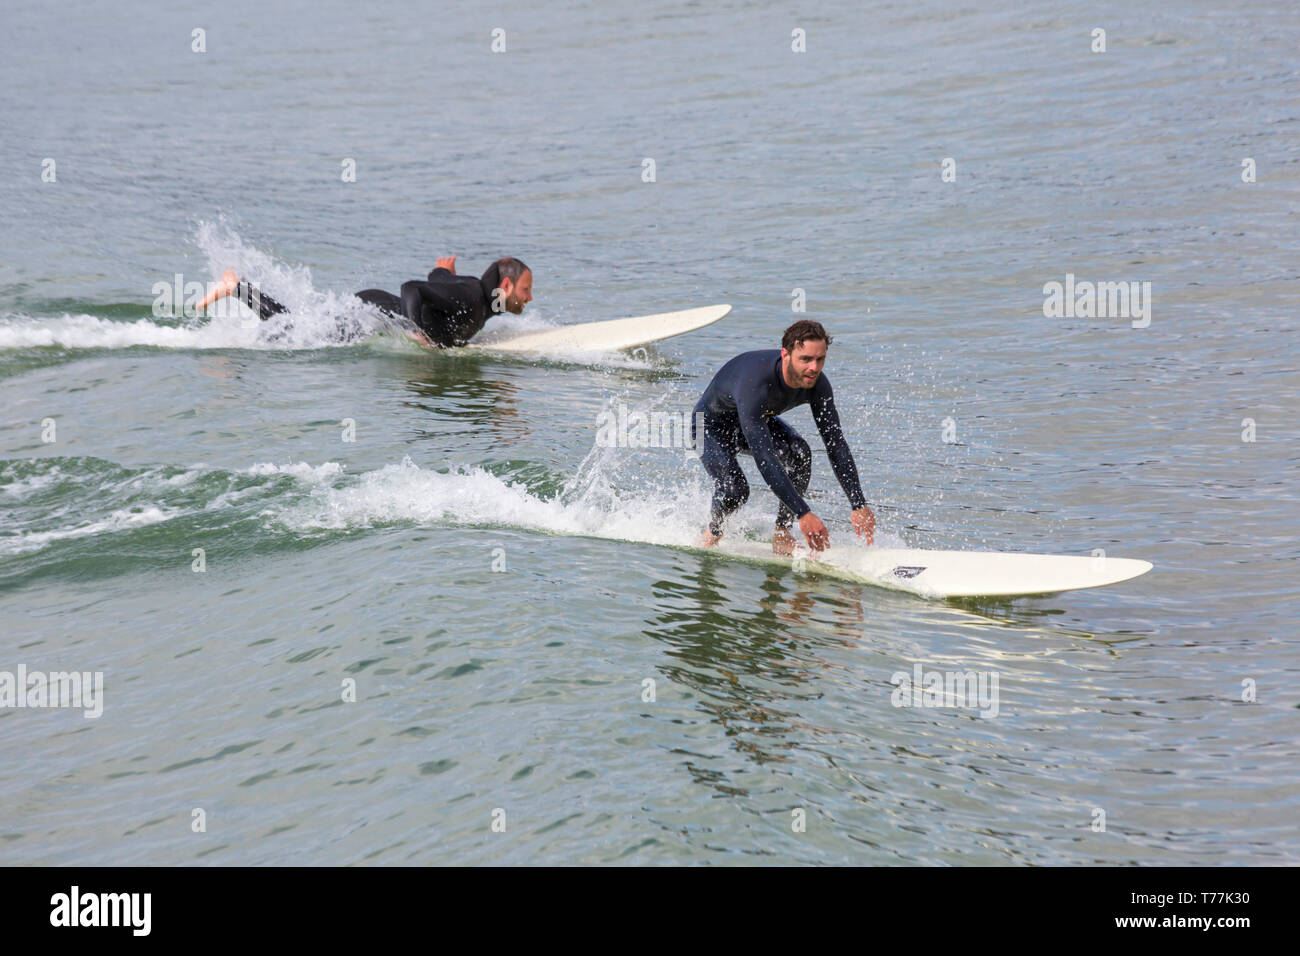 Bournemouth, Dorset, UK. 5th May 2019. UK weather: sunshine, but cool for the morning at Bournemouth beaches and mainly empty in stark contrast to the last Bank Holiday weekend. Surfers in action.   Credit: Carolyn Jenkins/Alamy Live News Stock Photo